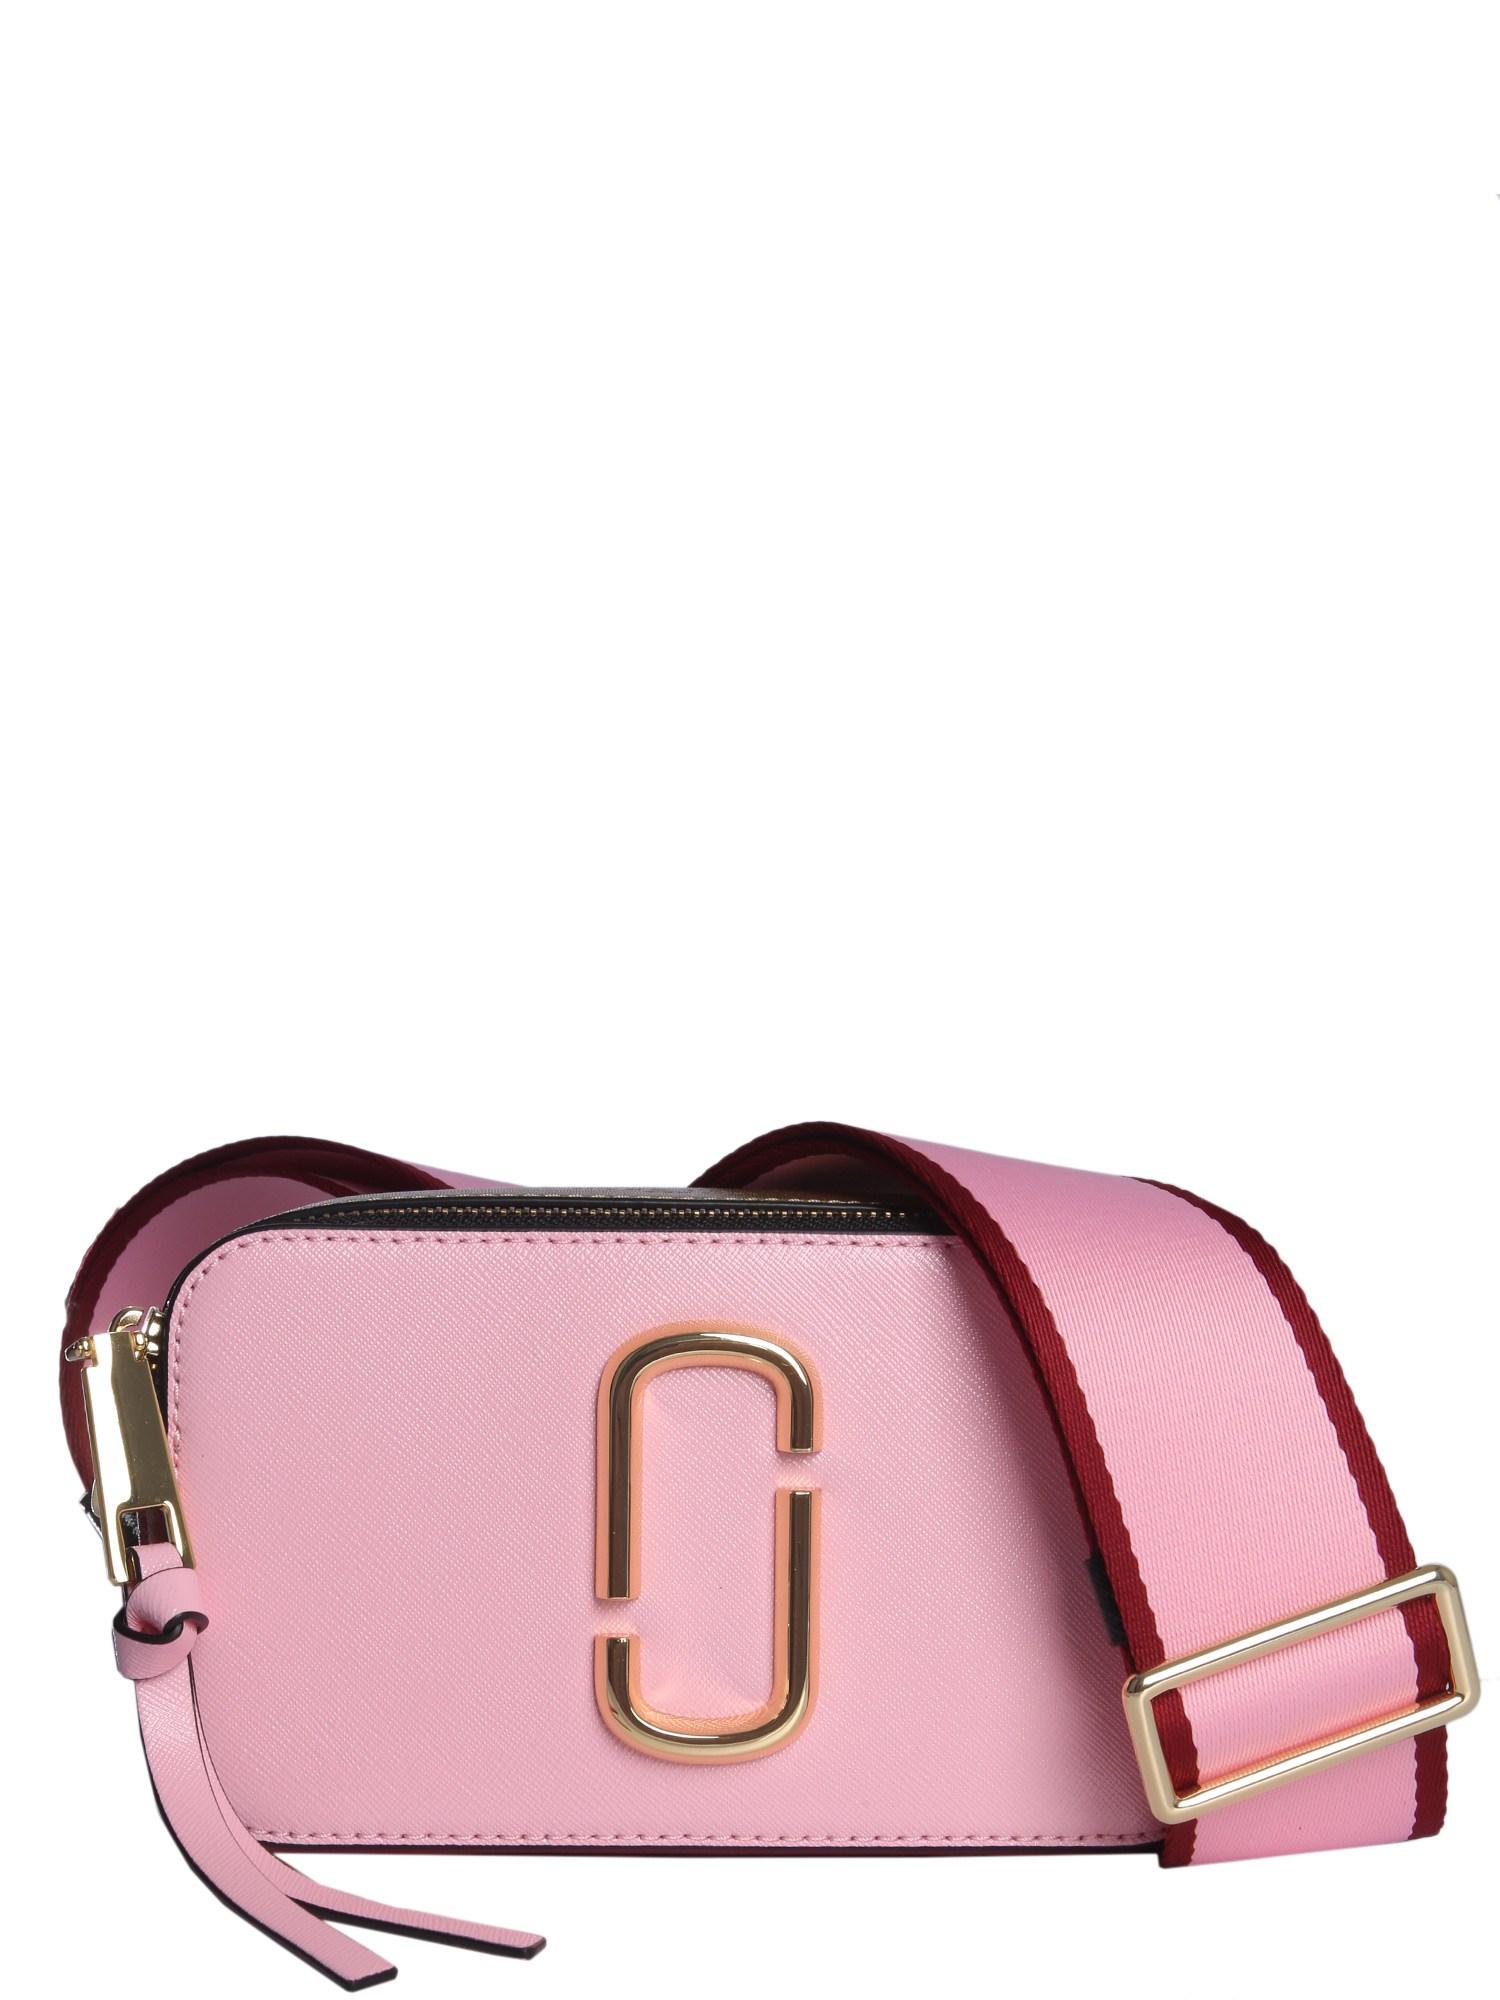 Lyst - Marc Jacobs Small Snapshot Leather Camera Bag in Pink - Save 16%